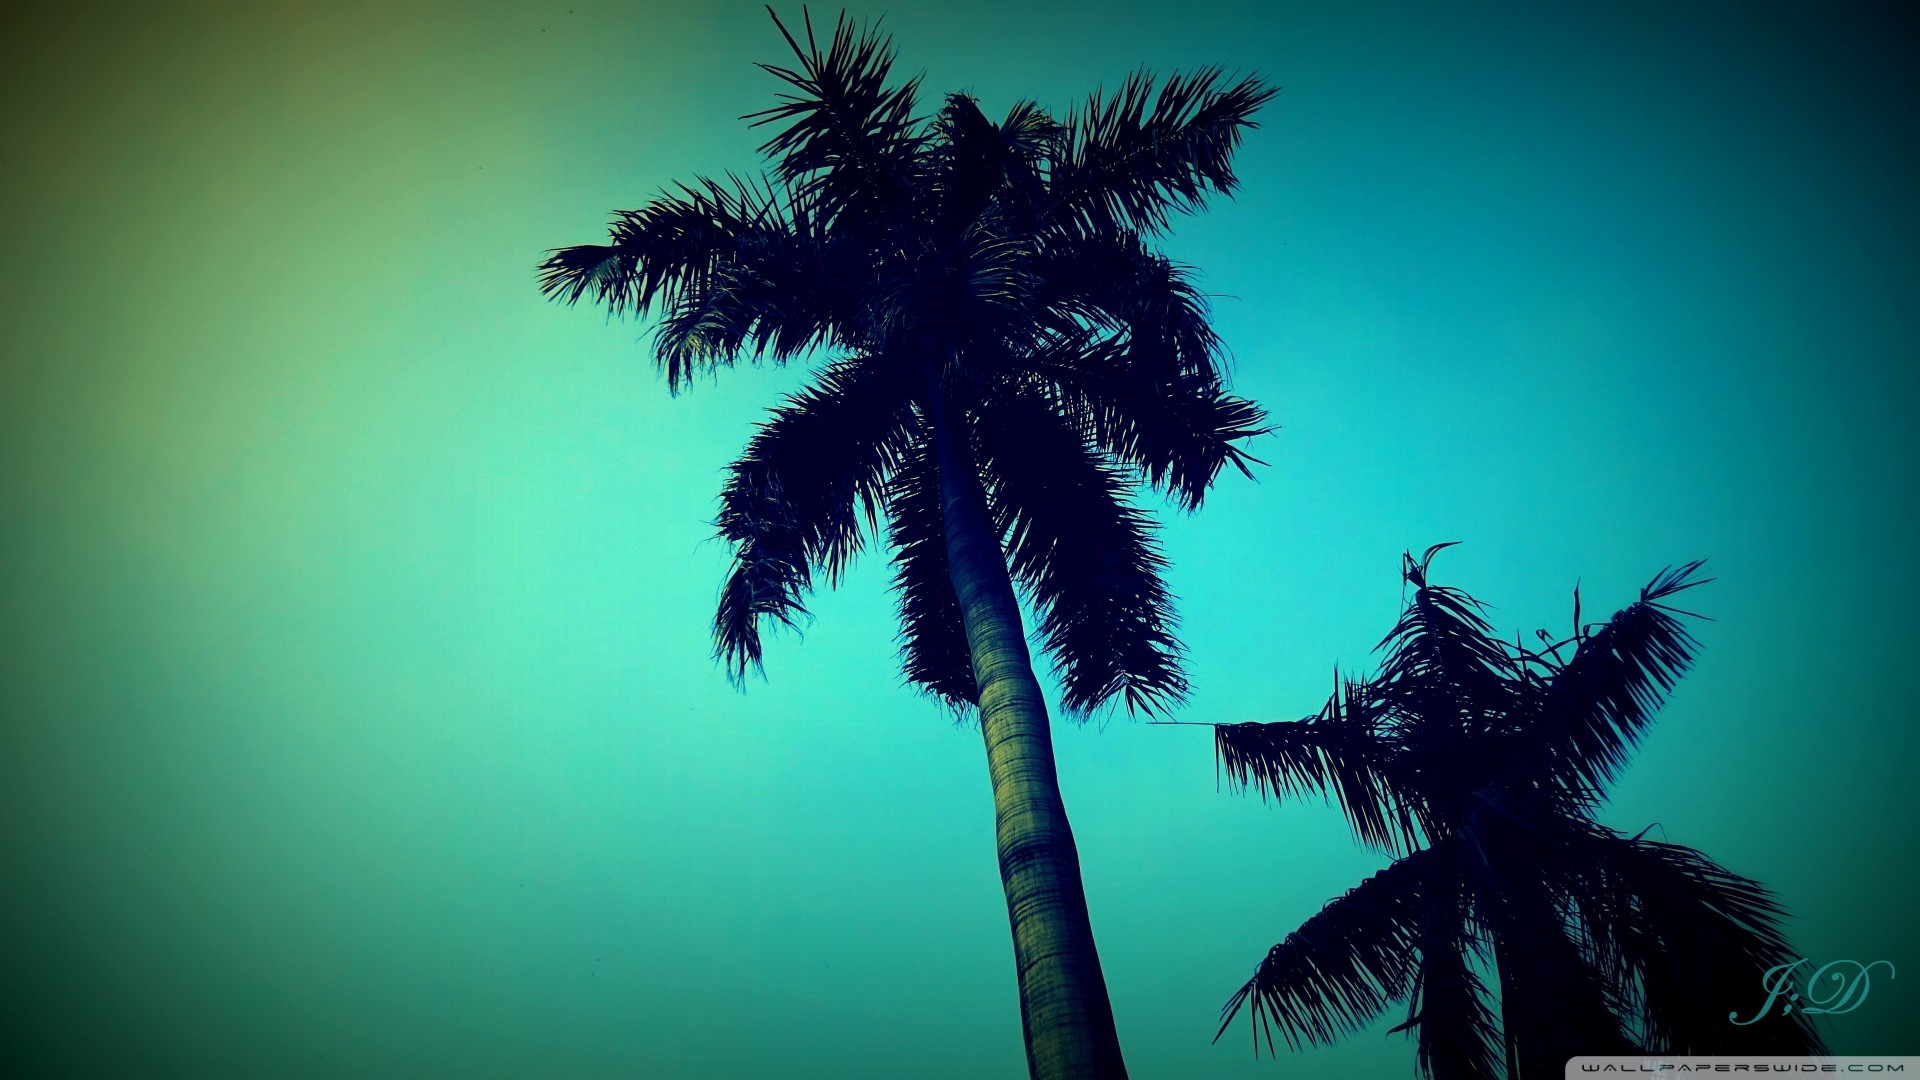 General 1920x1080 worm's eye view dusk low-angle palm trees outdoors sky gradient